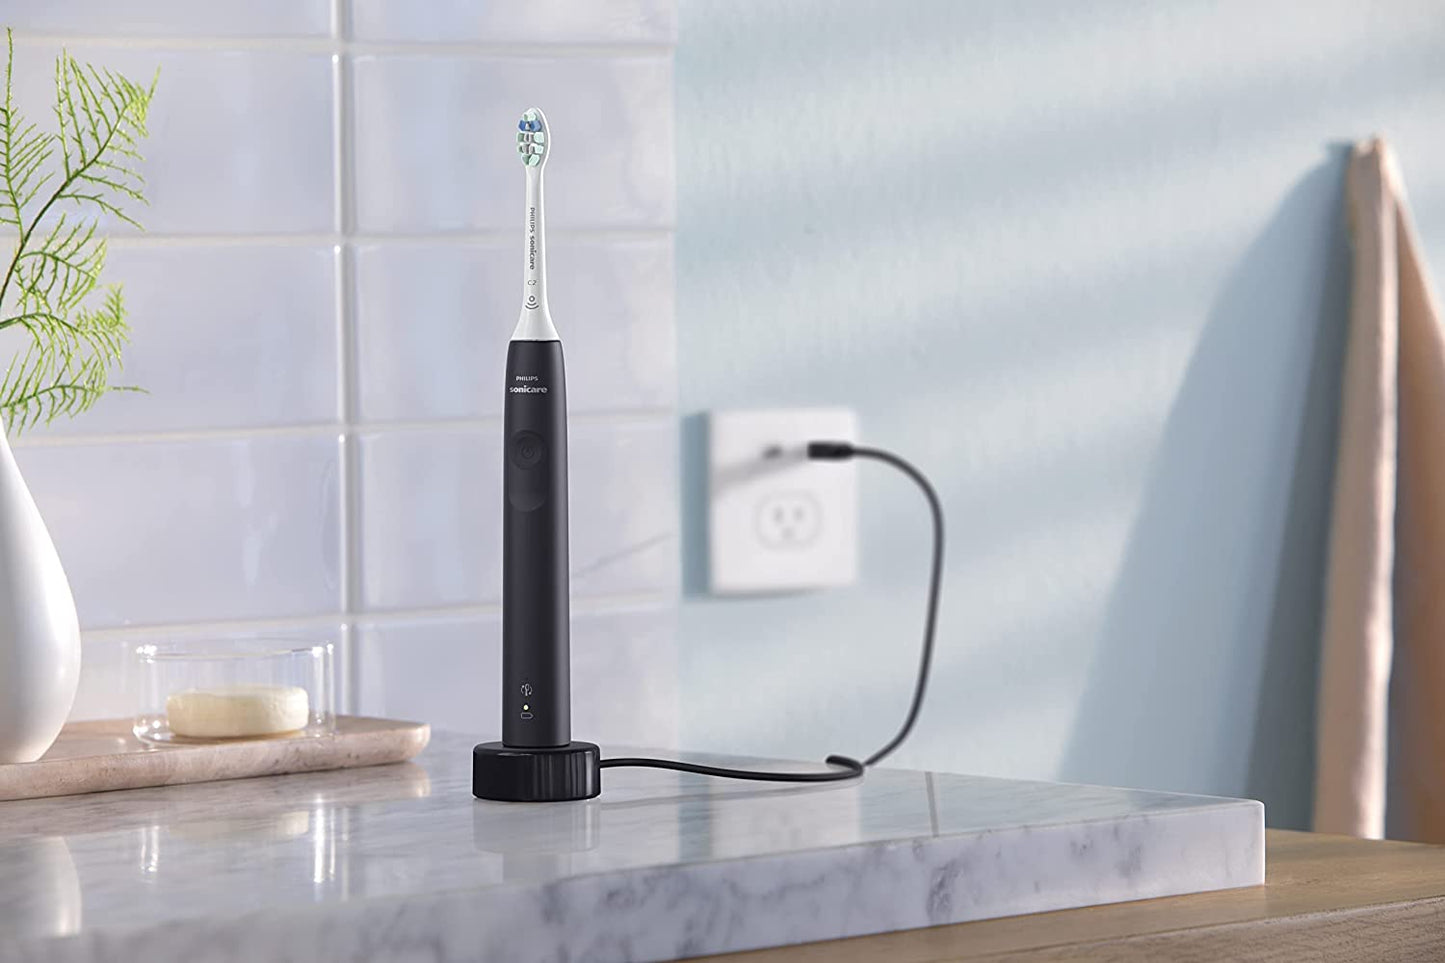 Philips Sonicare 4100 Power Toothbrush, Rechargeable Electric Toothbrush with Pressure Sensor, Black HX3681/24